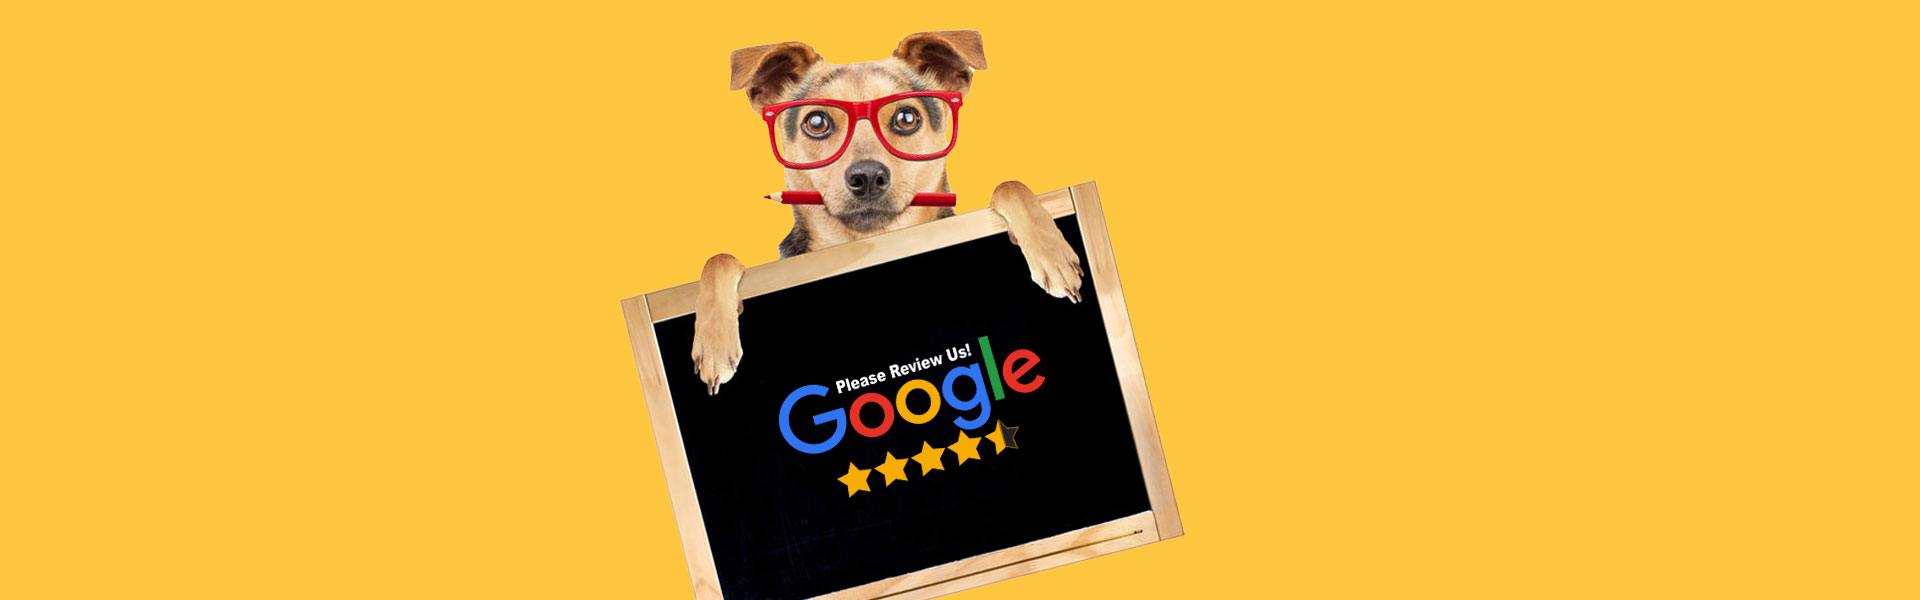 Why are Google reviews important for business?